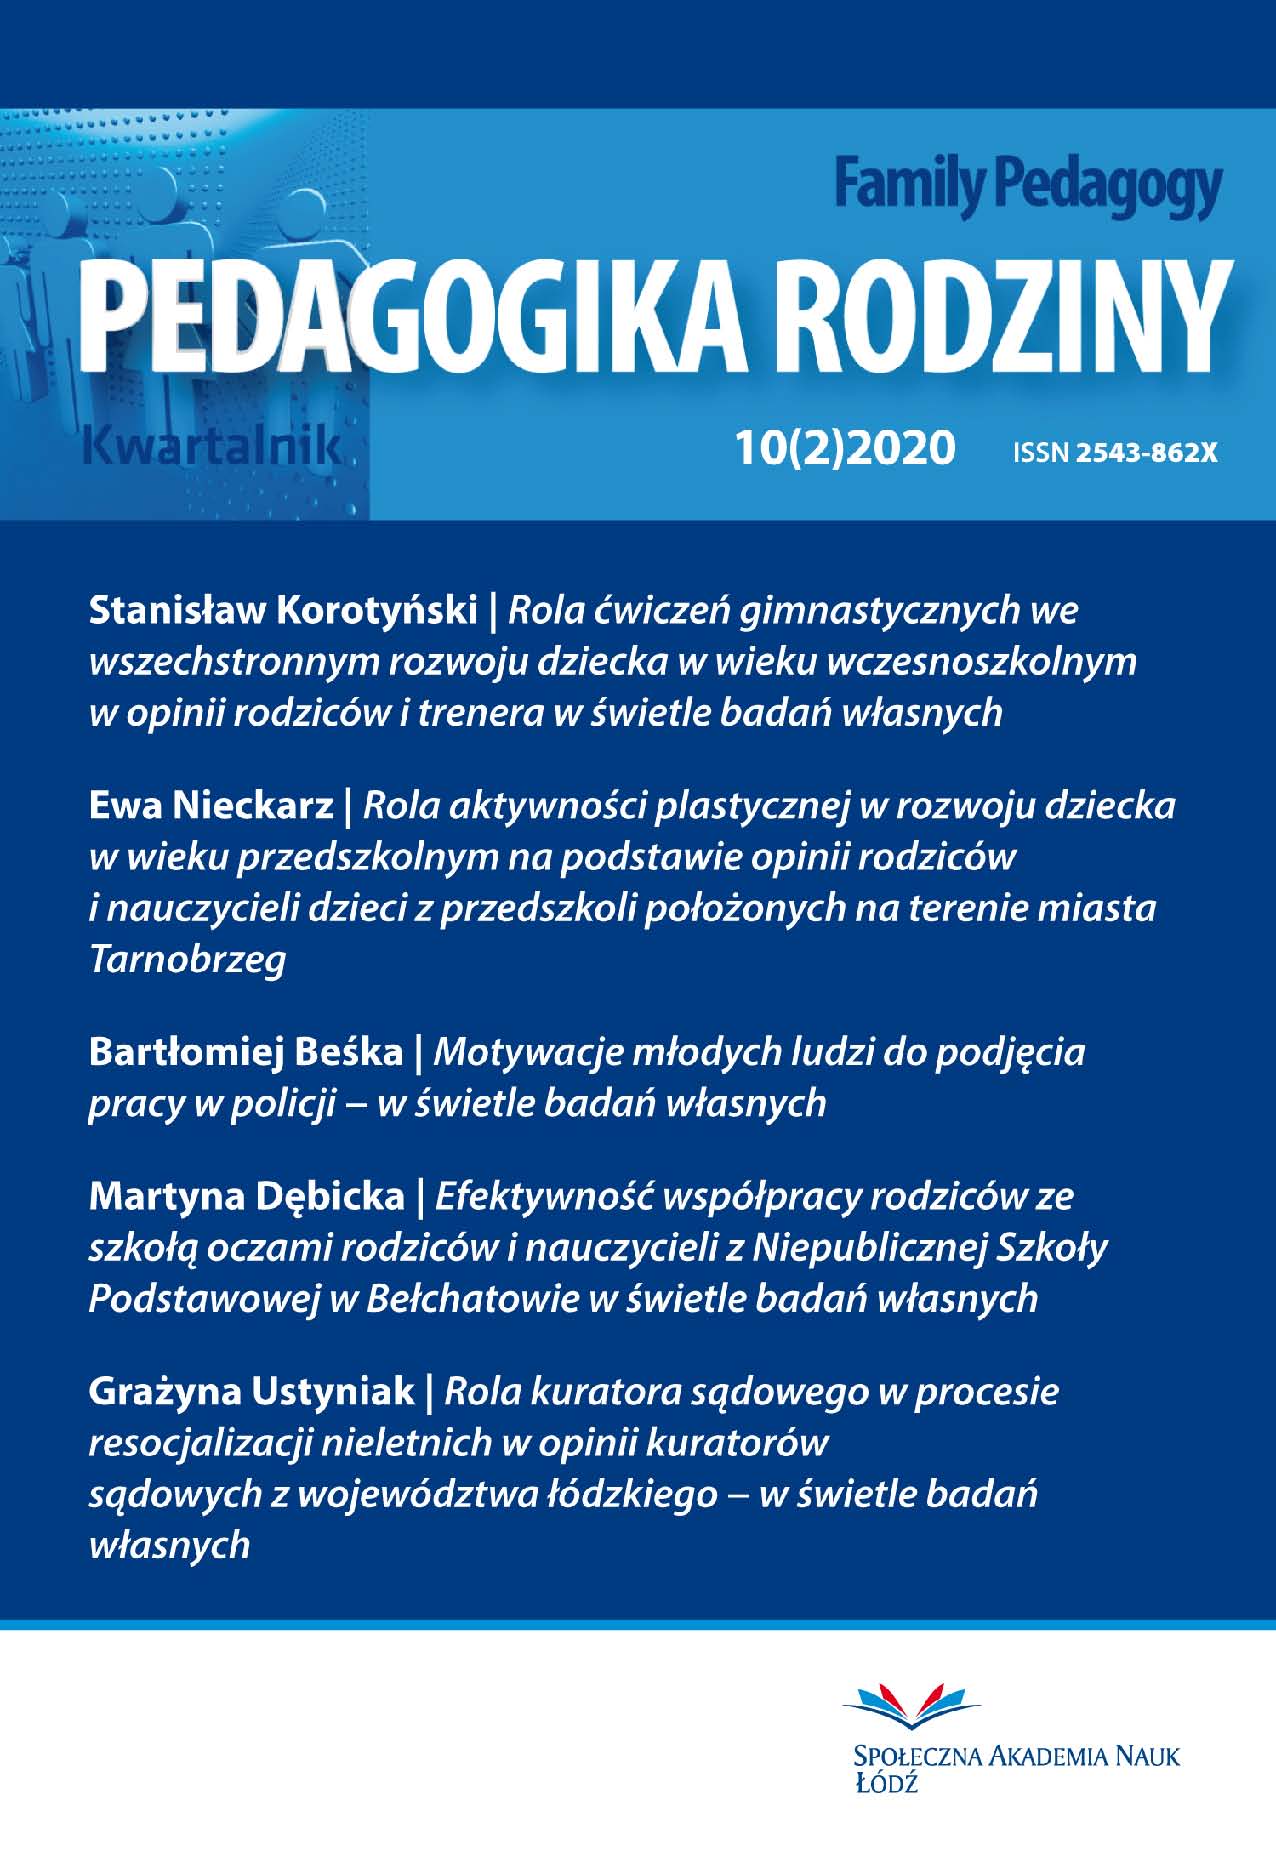 The Importance of Music Education in the Development
of a Child at an Early Age in the Opinion of Parents
and teachers of the Primary and Secondary State Music
School in Pabianice Cover Image